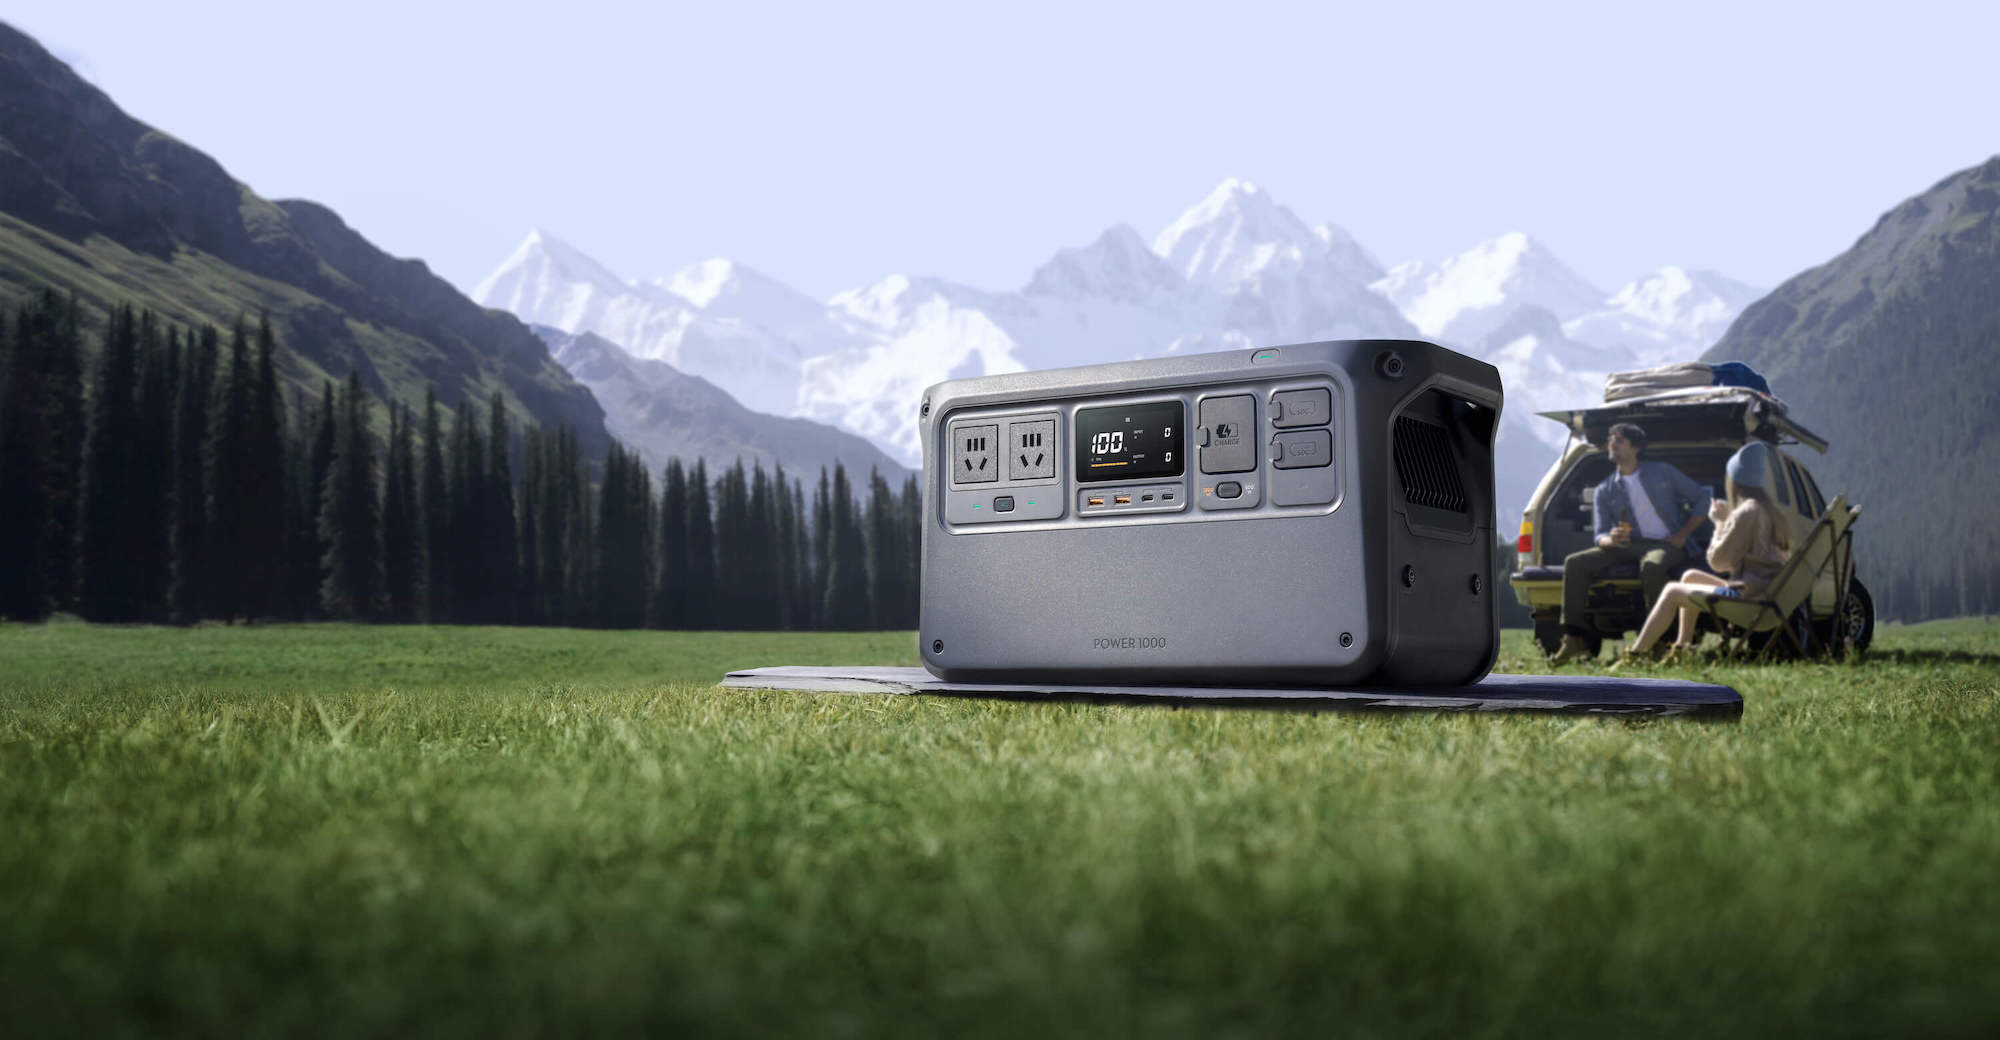 DJI Releases Power 1000 & Power 500: High-Capacity, Ultra-Quiet Outdoor Power Sources